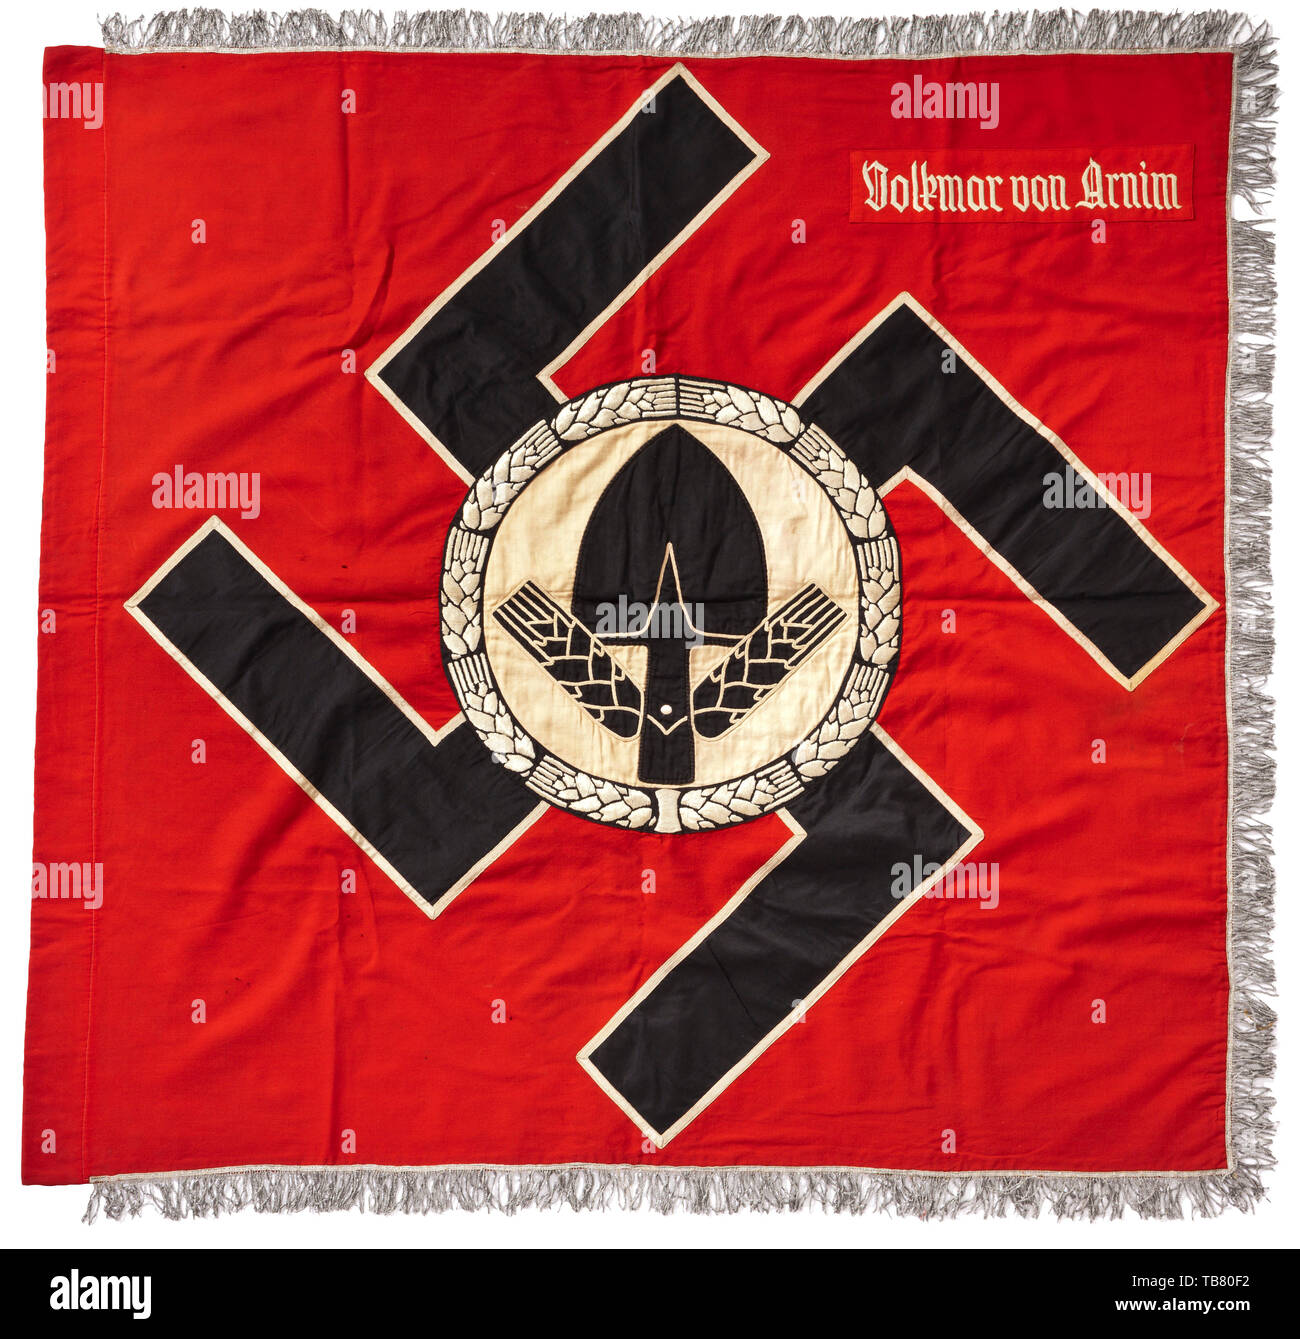 A flag of RAD Battalion Volkmar von Arnim, Thick, red flag cloth with three-sided silver fringe, both sides with a sewn-on black swastika with white edging on which is a white circle with a black RAD emblem enclosed by a white, hand-embroidered wreath of grain. Both sides with a light red flag patch and hand-embroidered white unit designation. Damaged in places, signs of age. Dimensions circa 120 x 110 cm. A beautiful, richly embroidered example. historic, historical 20th century, Editorial-Use-Only Stock Photo